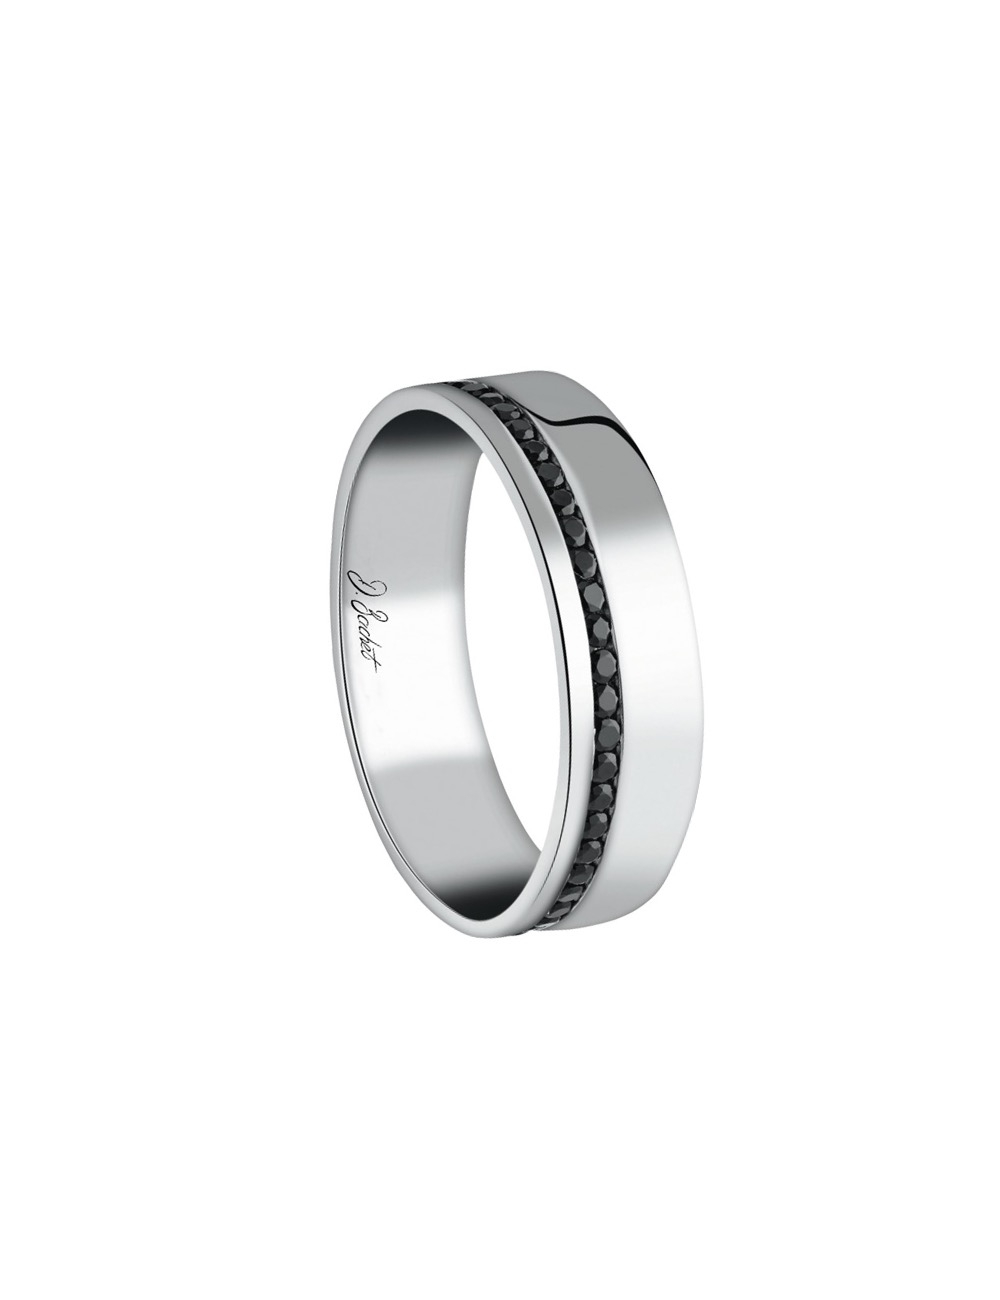 In platinum, yellow gold or pink gold, it is a wedding ring that plays on graphic contrasts.